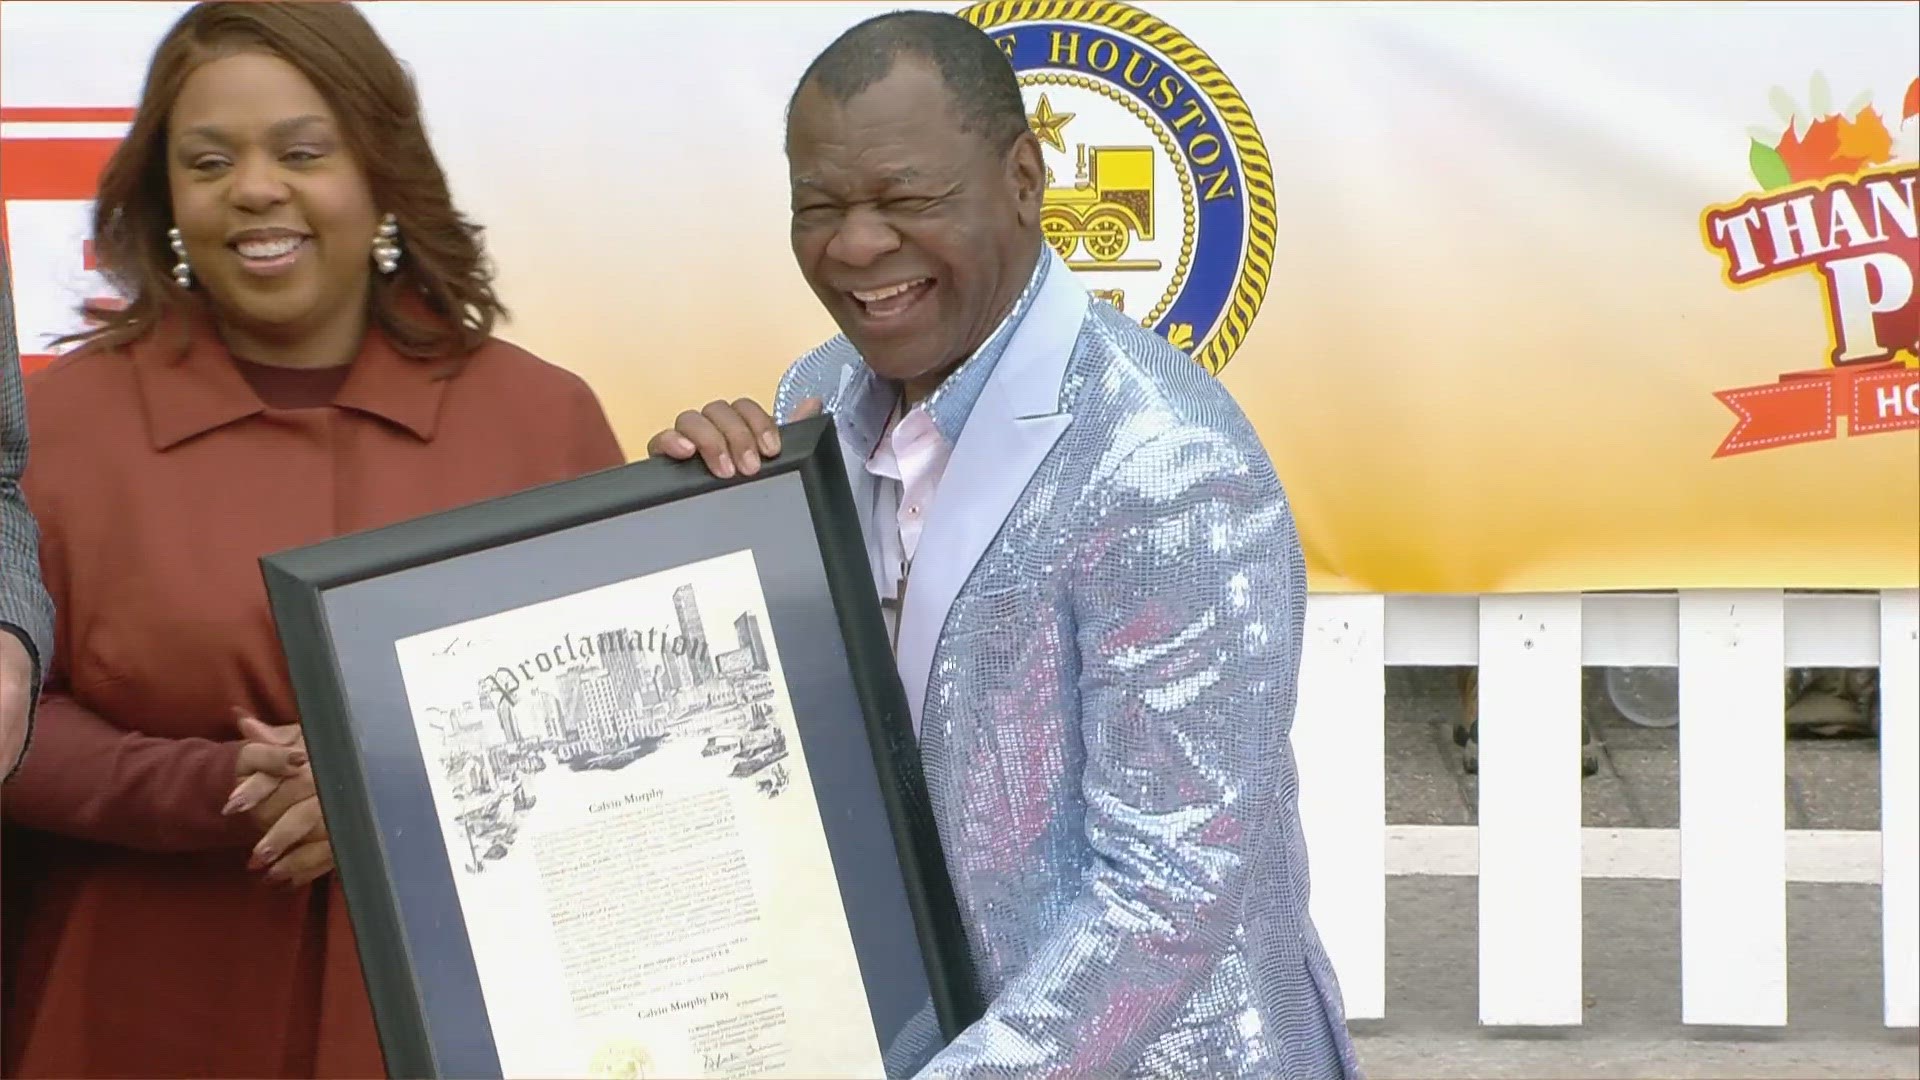 Houston Mayor Sylvester gives Rockets Hall of Famer Calvin Murphy his own day and the key tot he city at the H-E_B Thanksgiving Day Parade.